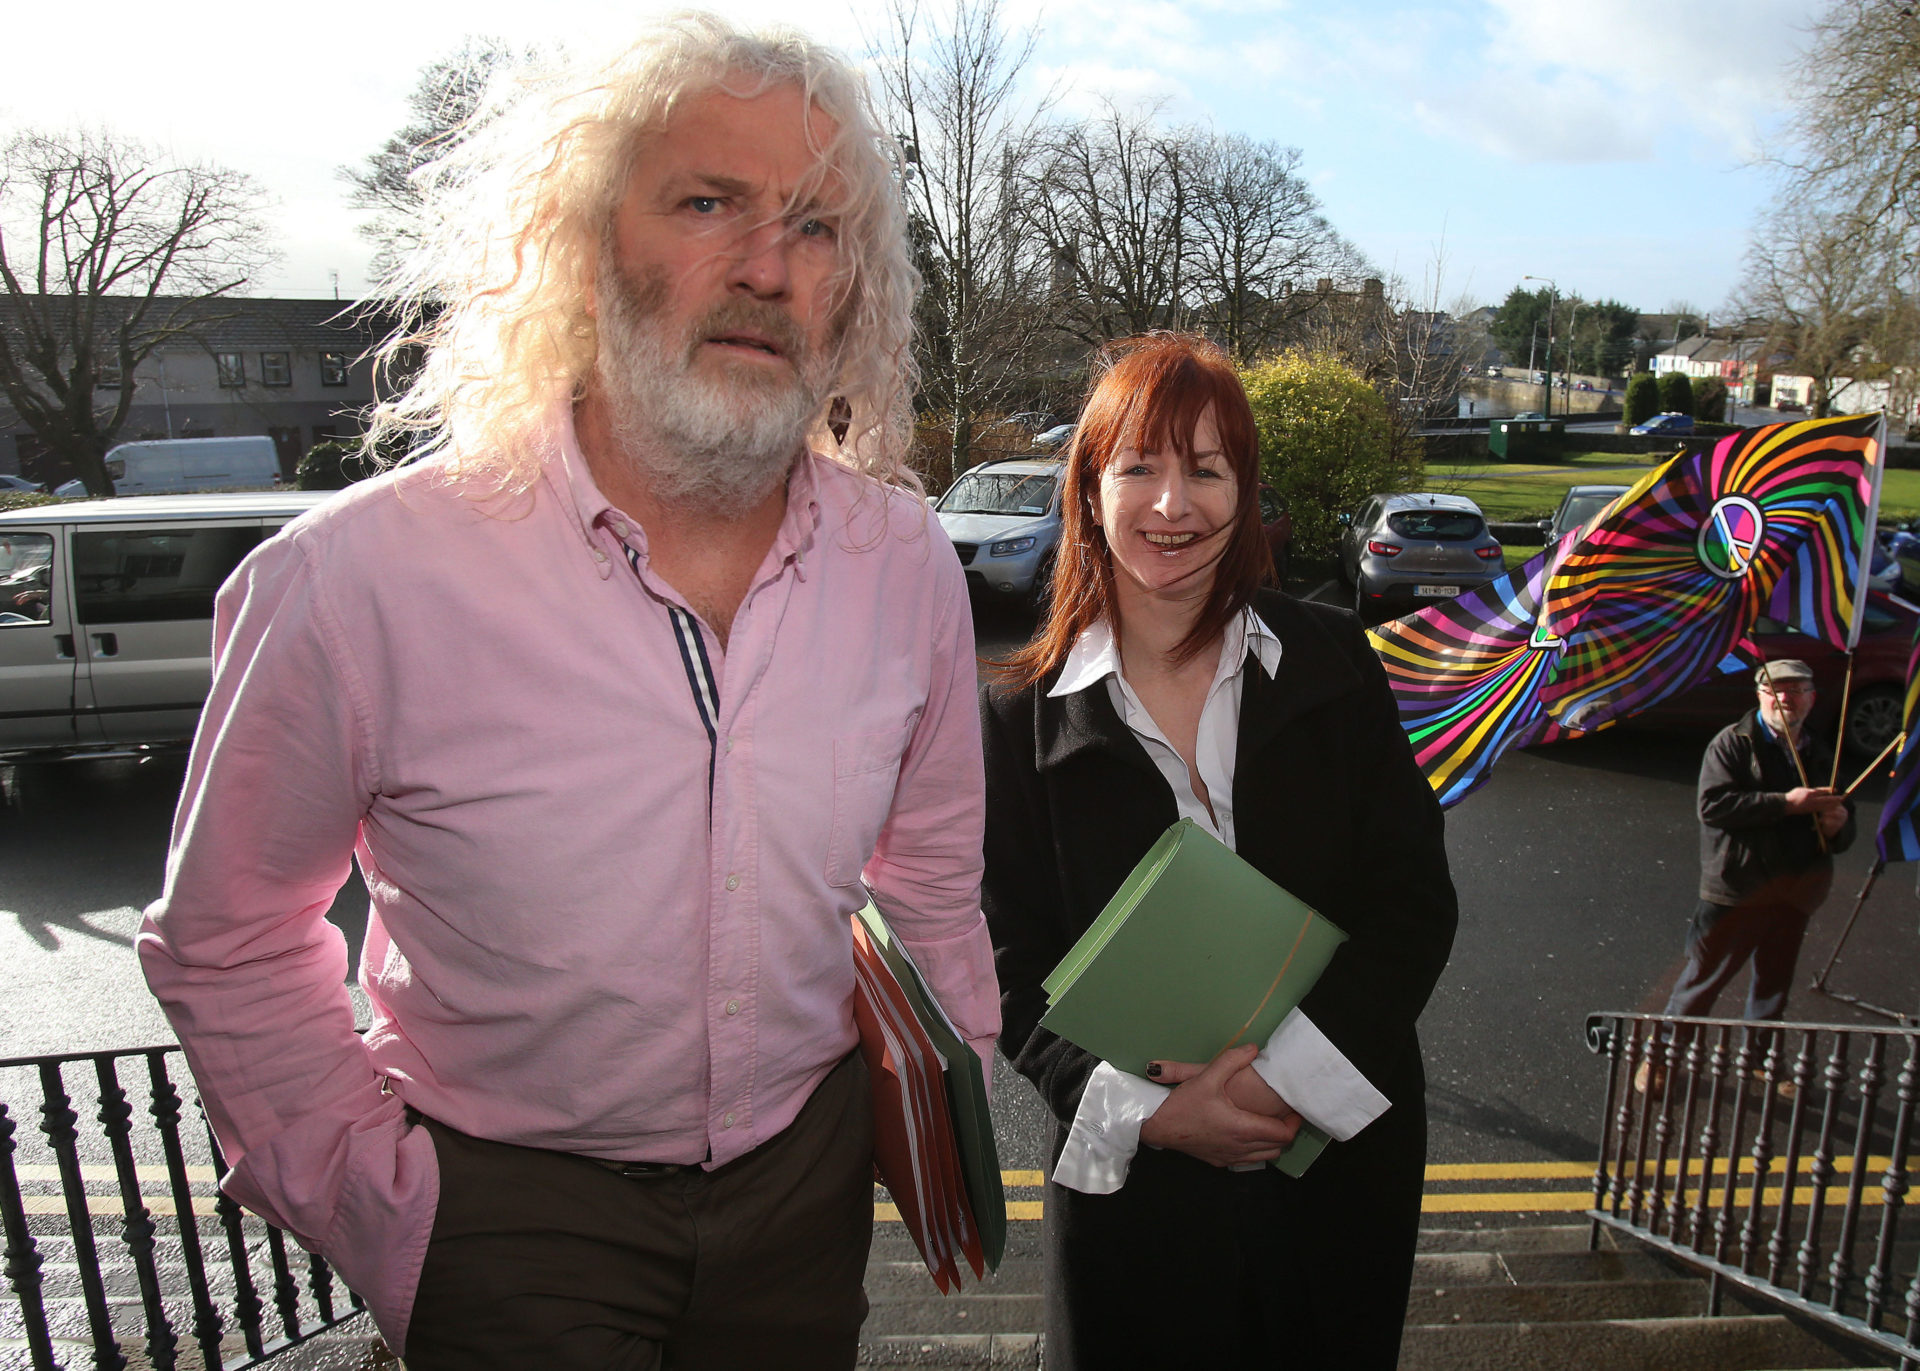 Mick Wallace and Clare Daly. Image: PA Images / Alamy 